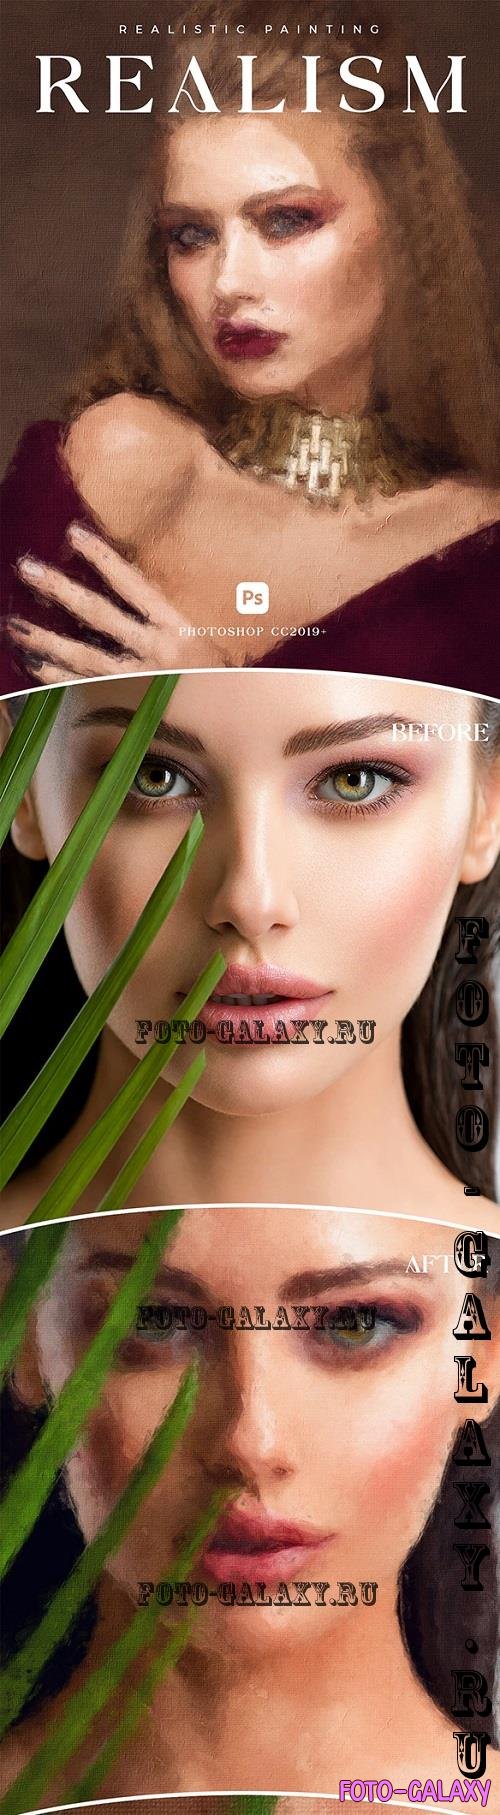 Realism - Realistic Painting Photoshop Action - 46738543